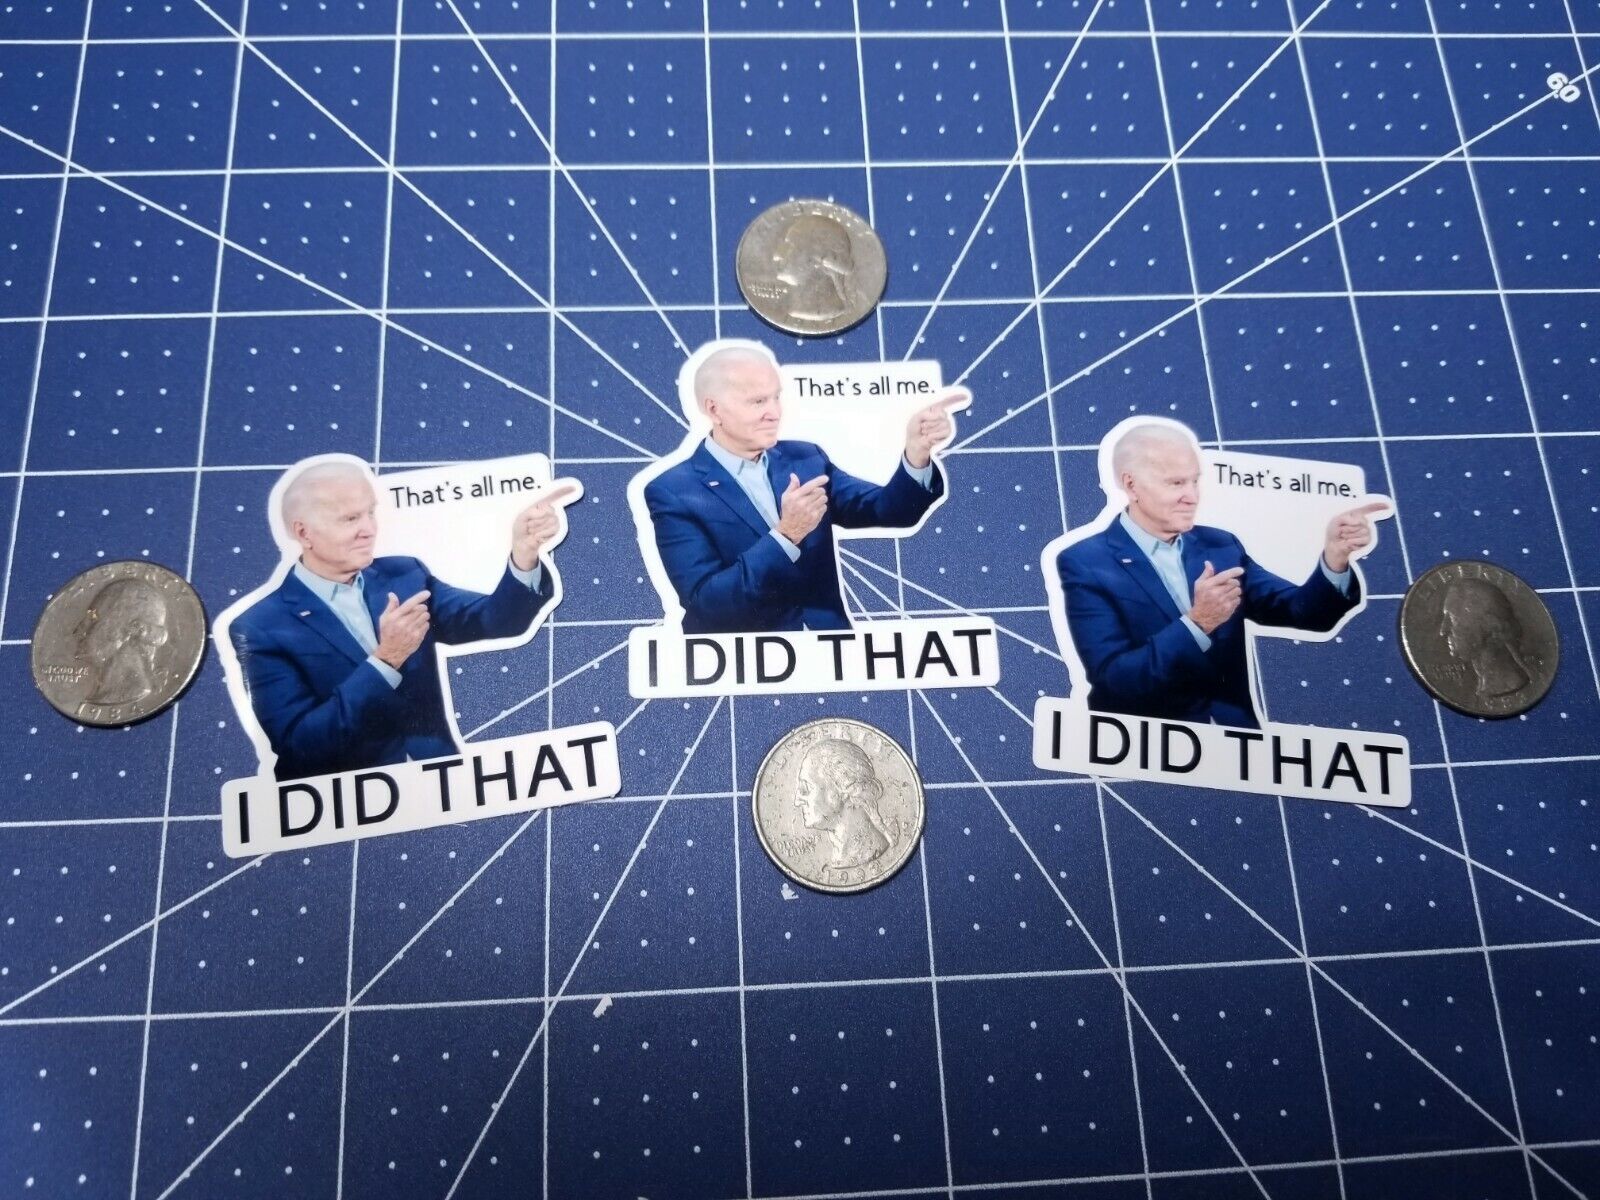 3PCS JOE BIDEN FUNNY STICKER THAT\'S ALL ME I DID THAT. (POINTED TO YOUR RIGHT)